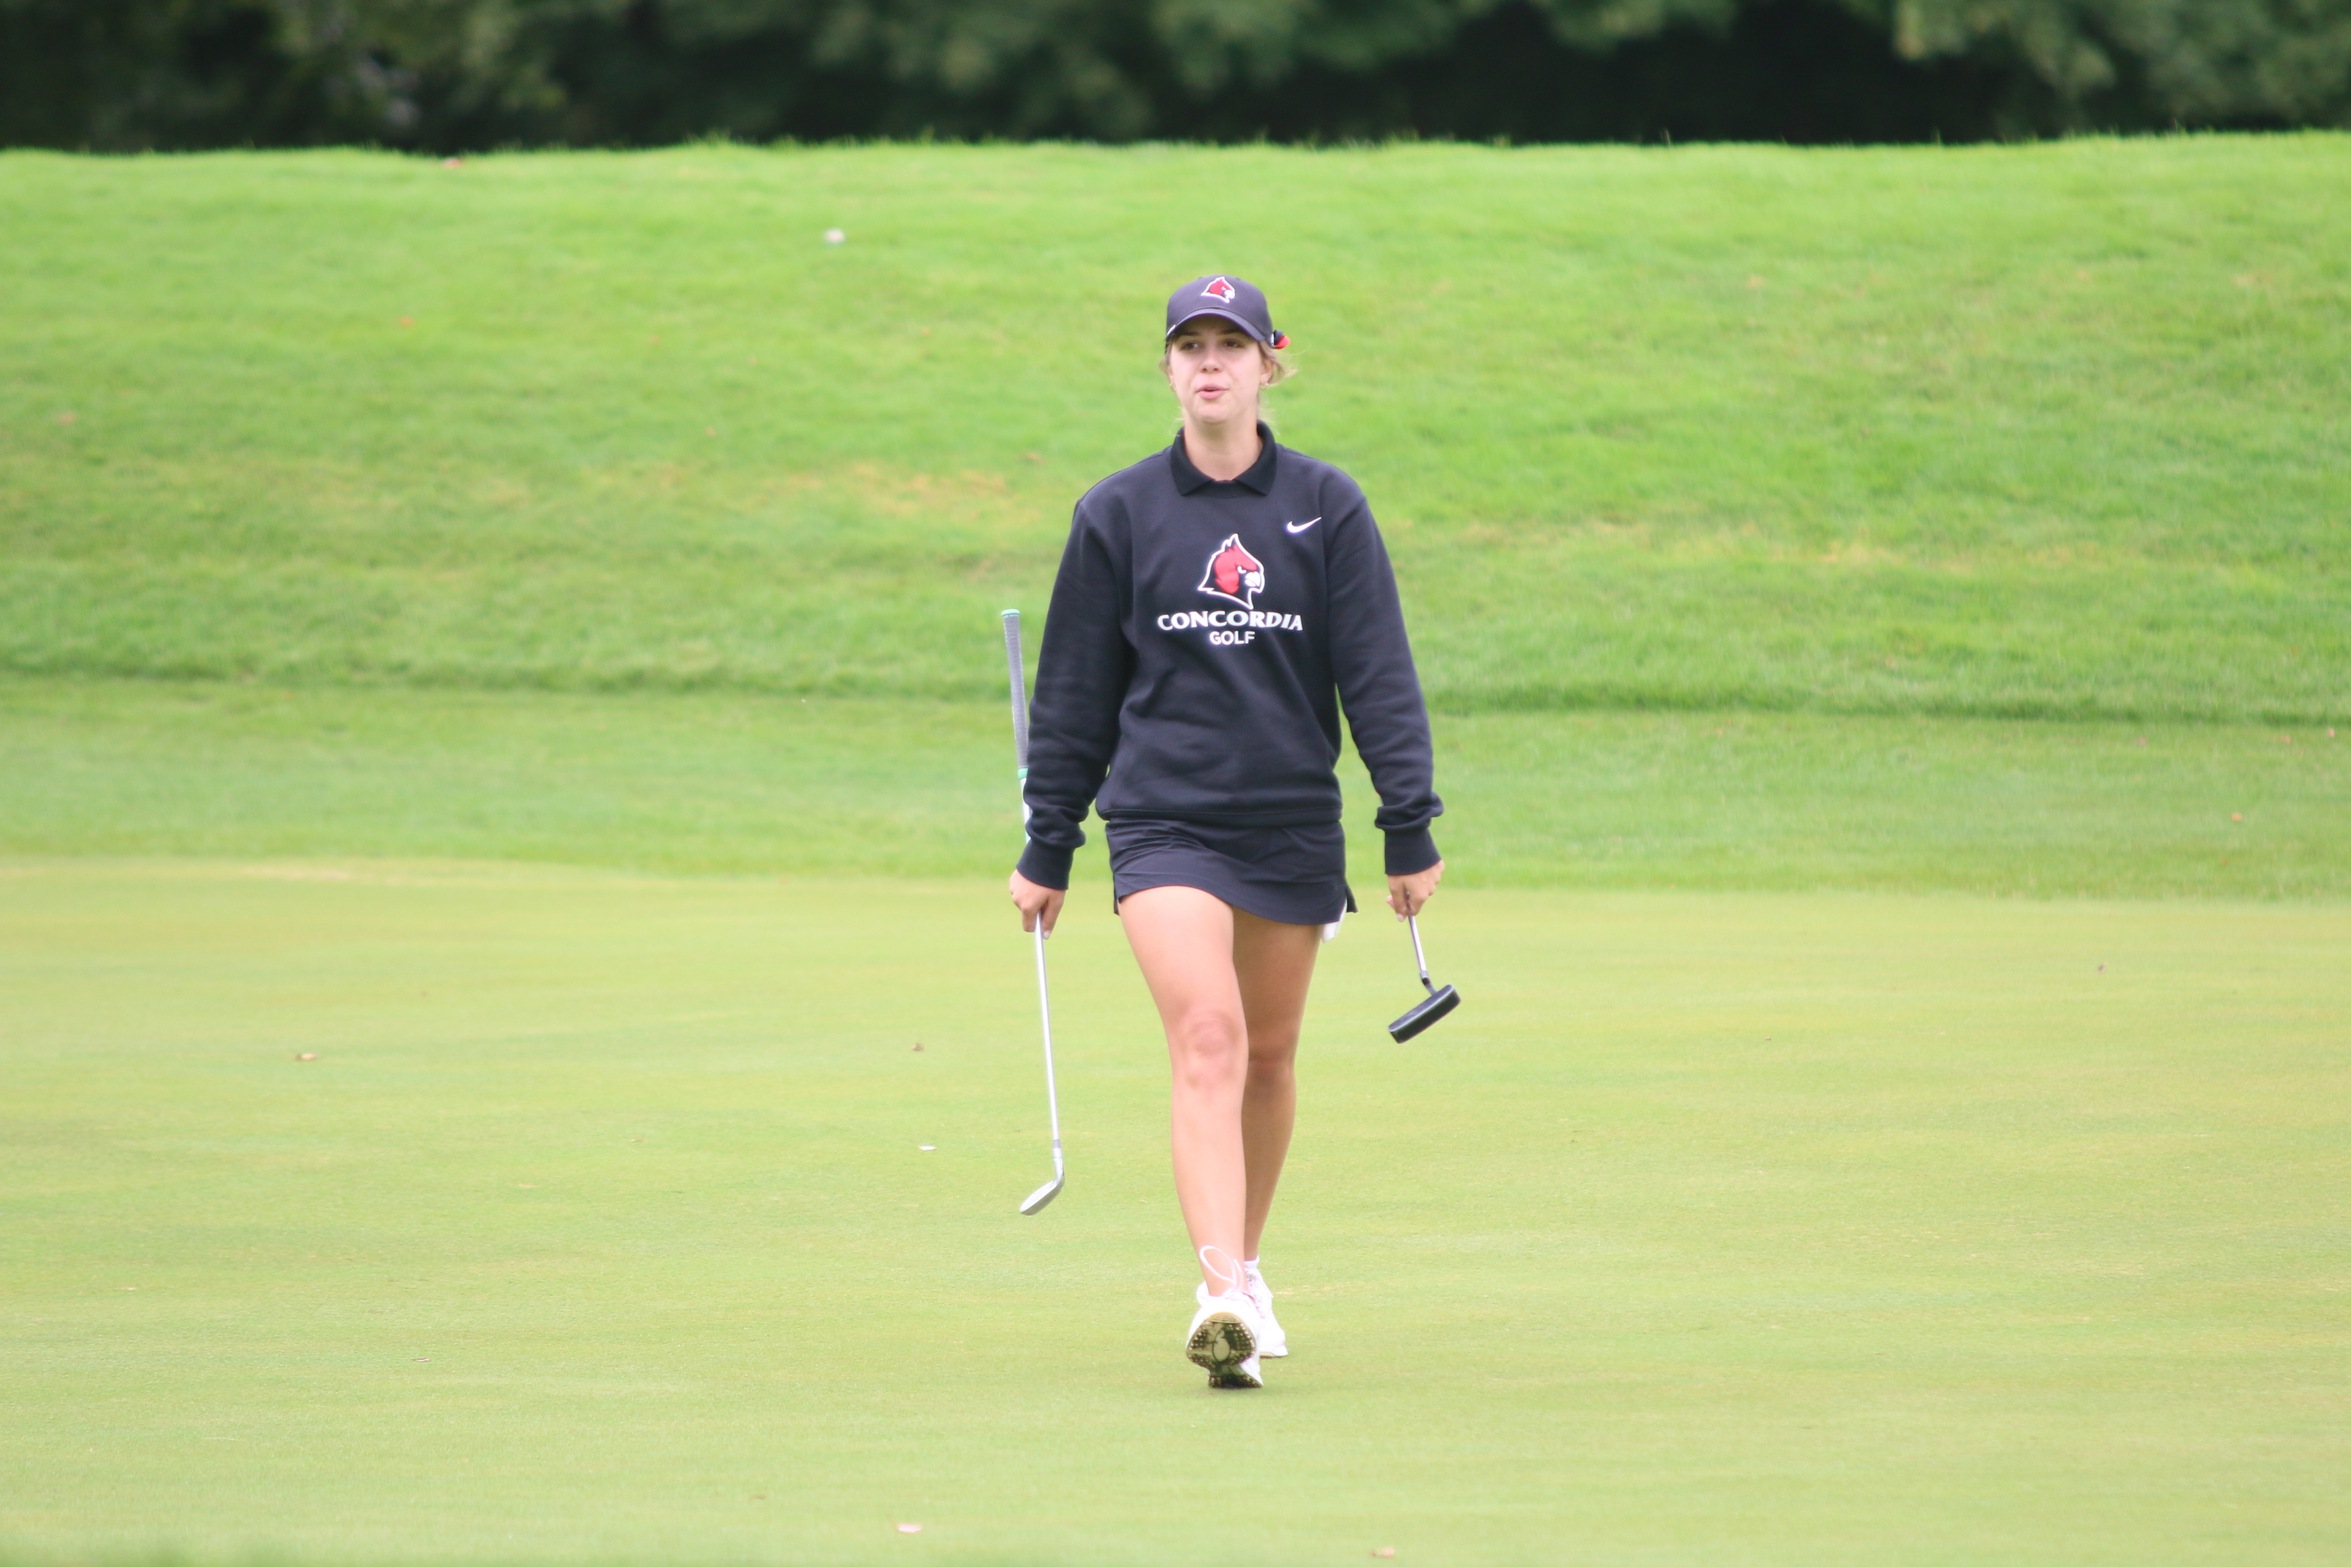 Spring Season opens for Women's Golf at Heritage Hills Collegiate